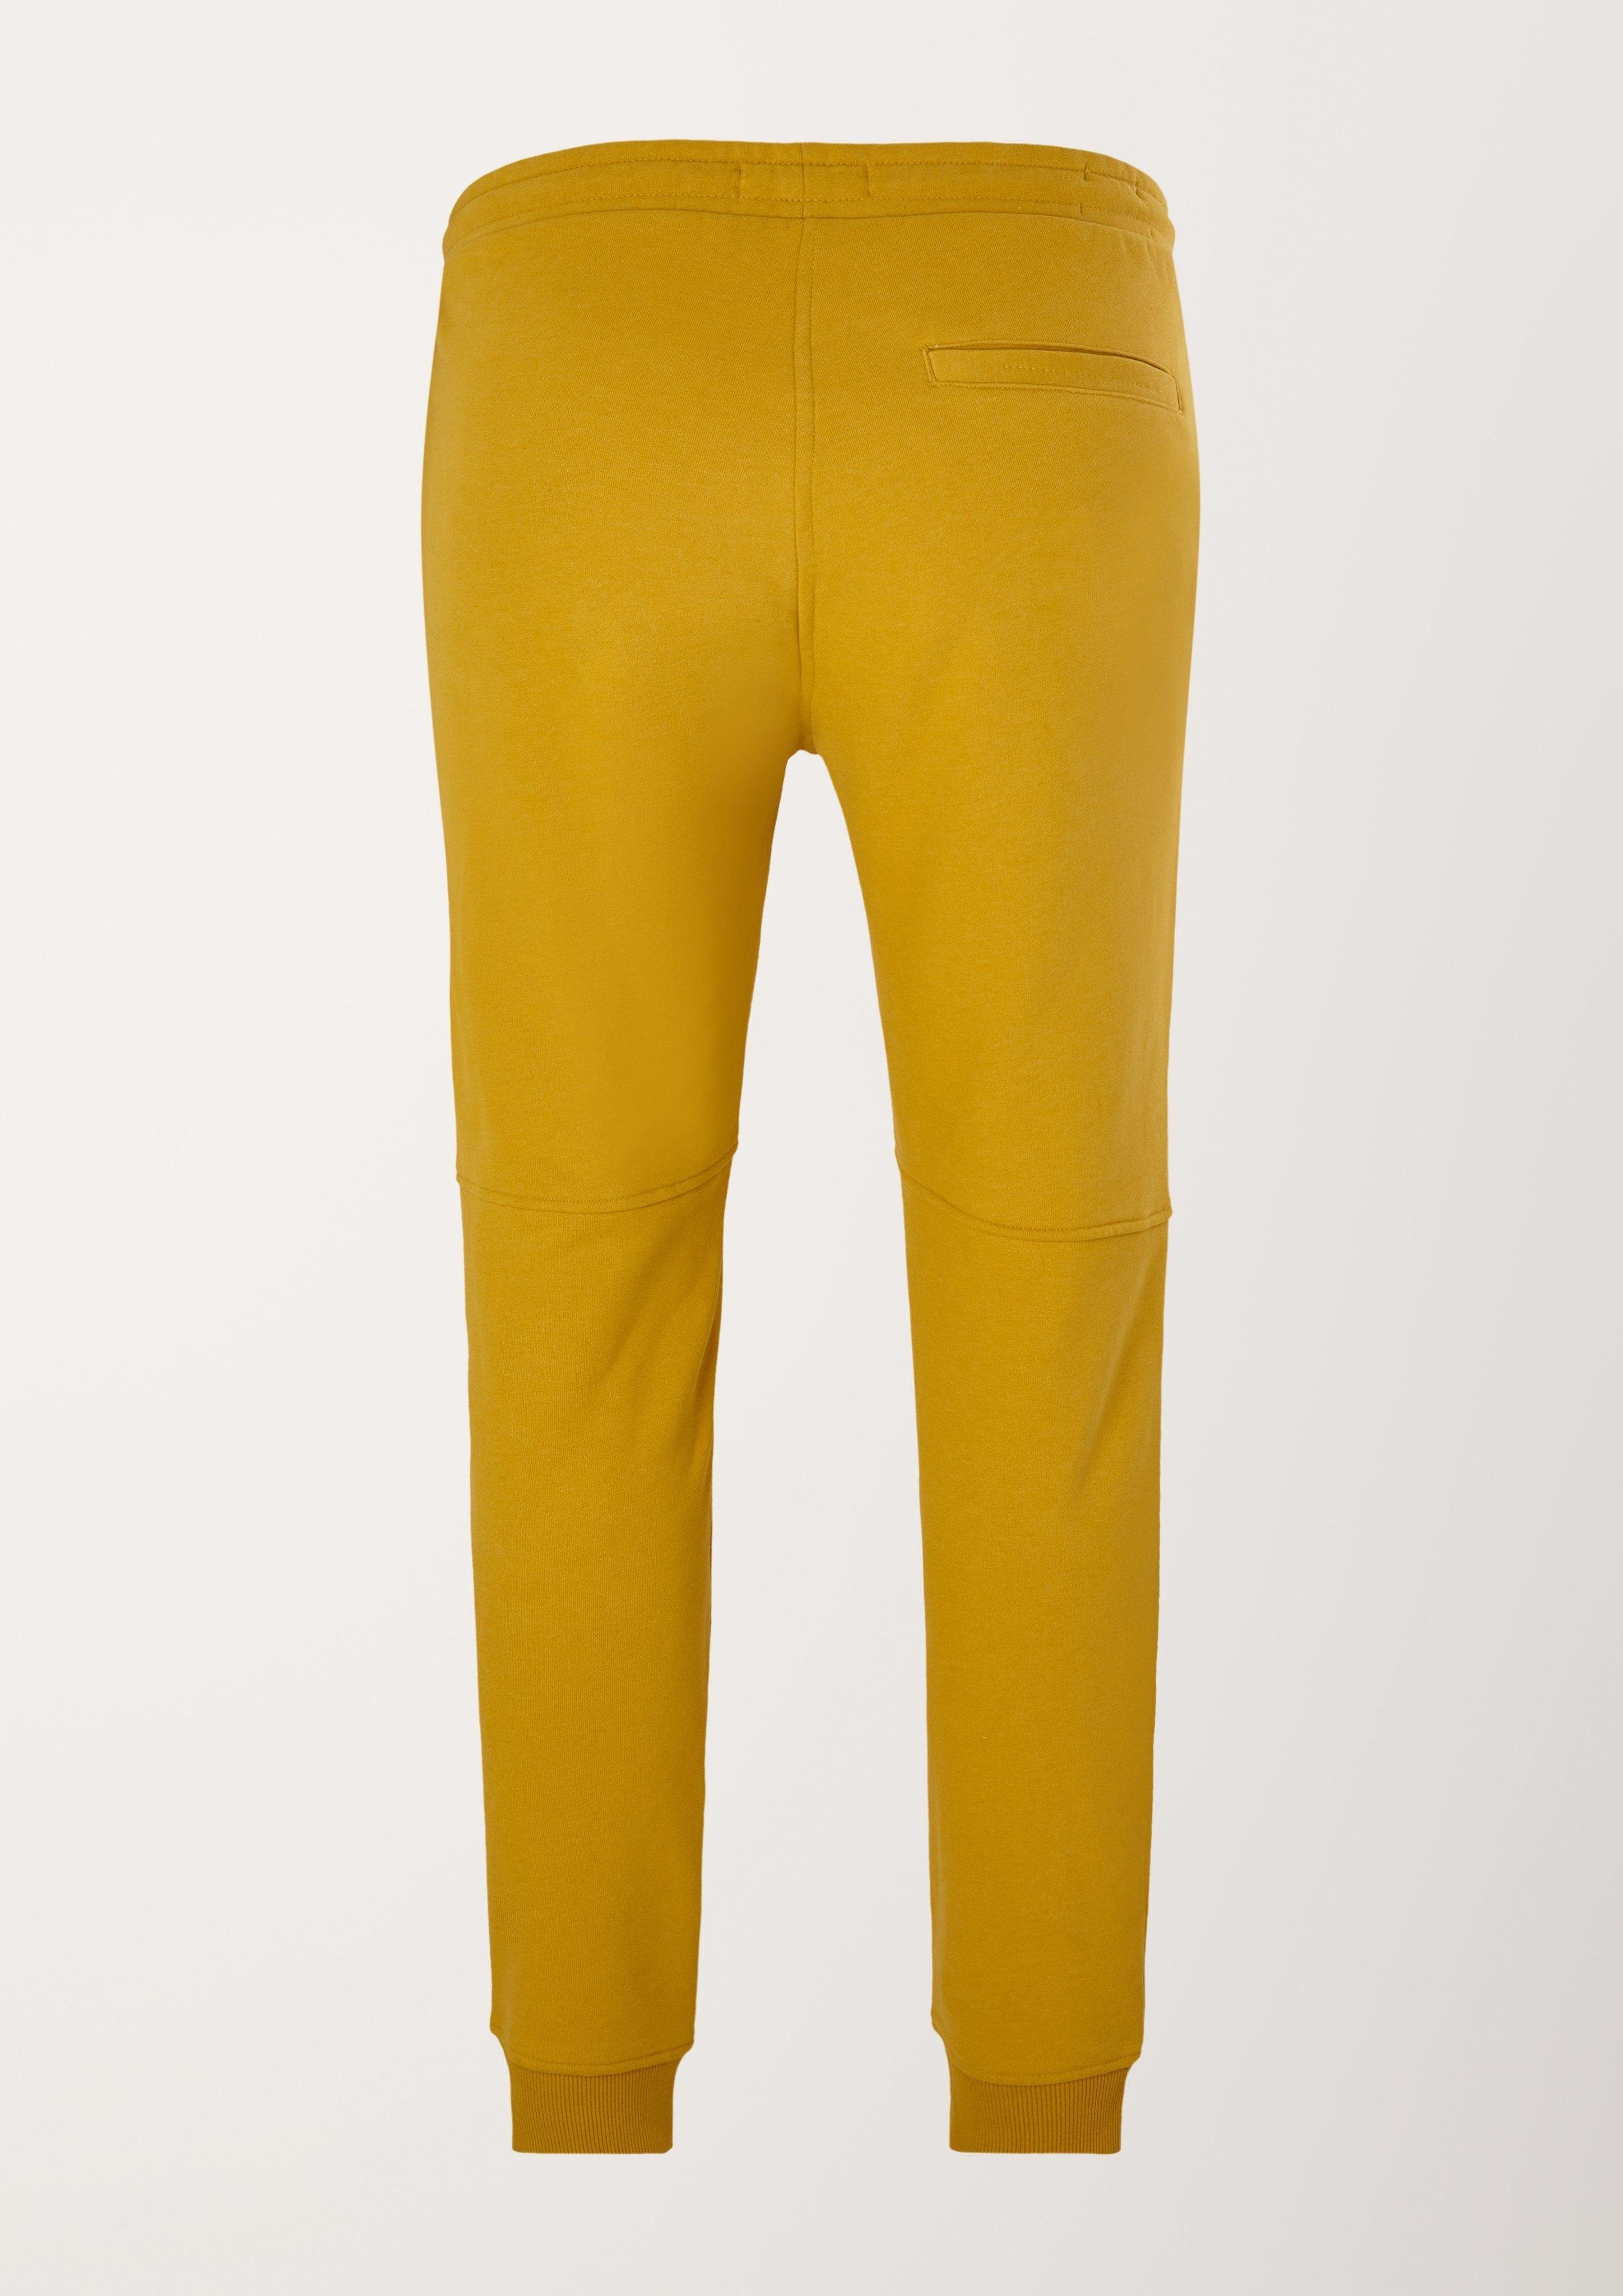 Stoffhose Relaxed: Sweat Rippbündchen yellow aus s.Oliver Jogger